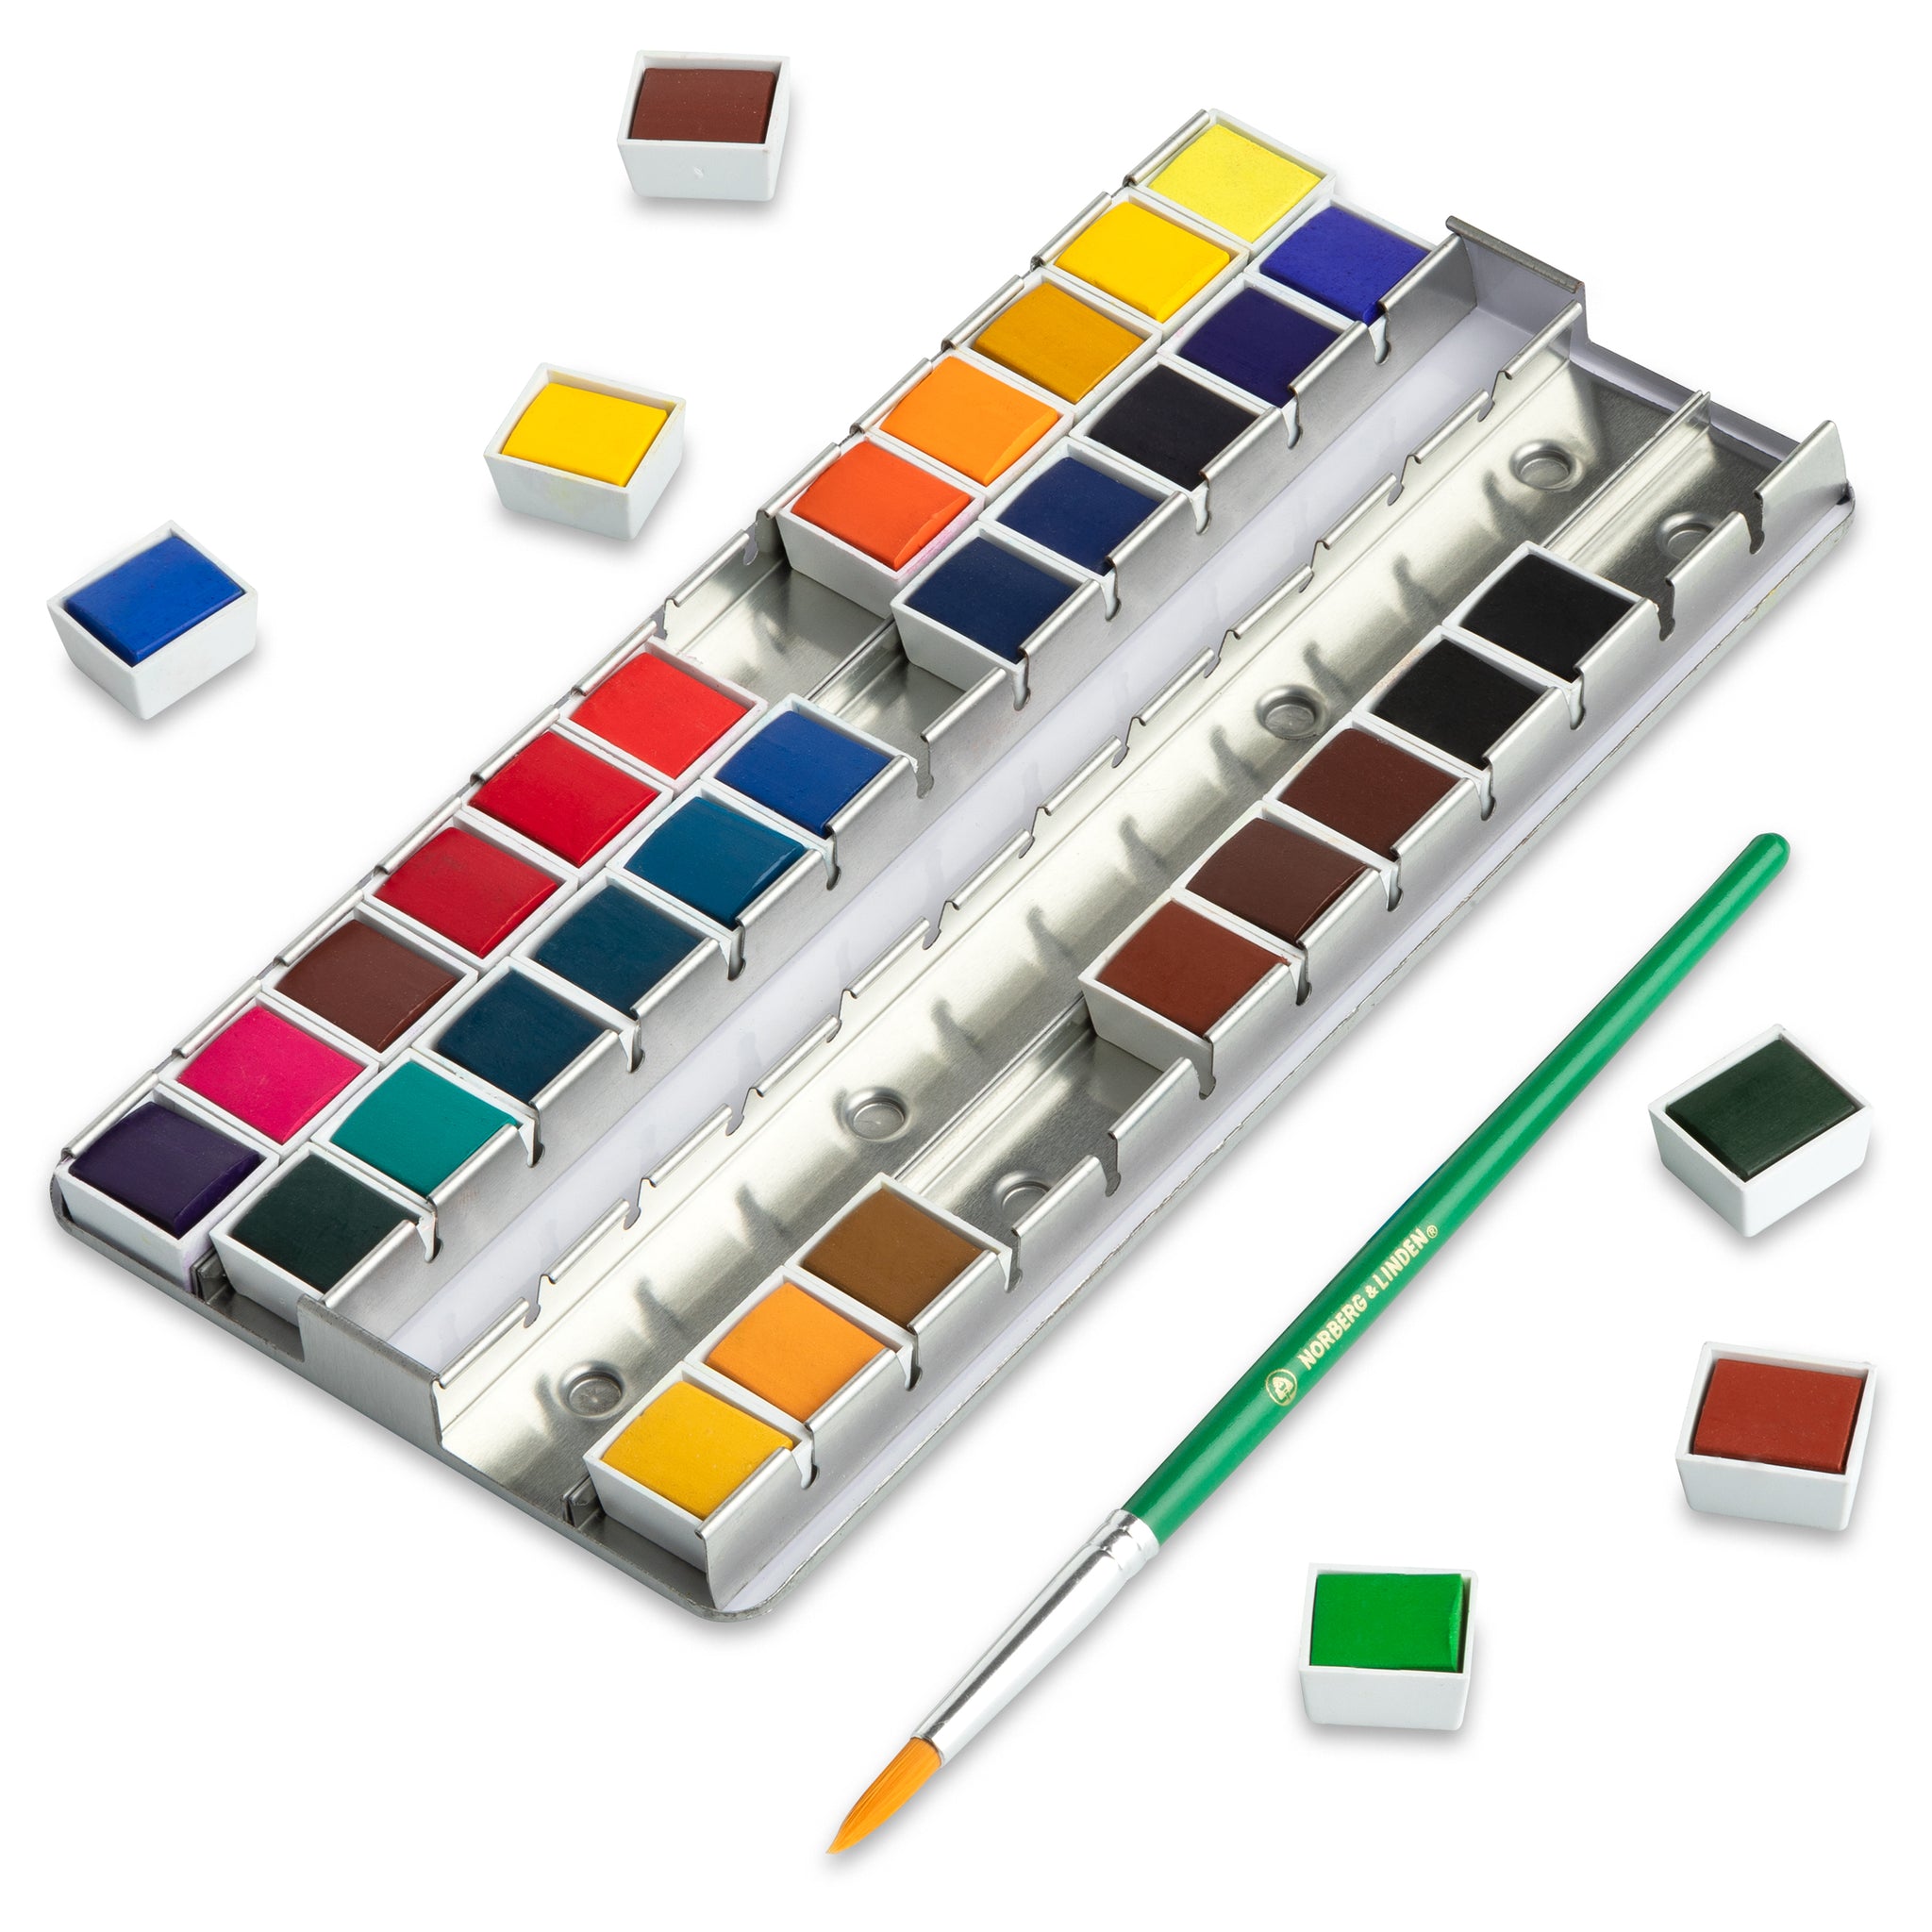 Water color paint set stock photo. Image of water, isolation - 20096086